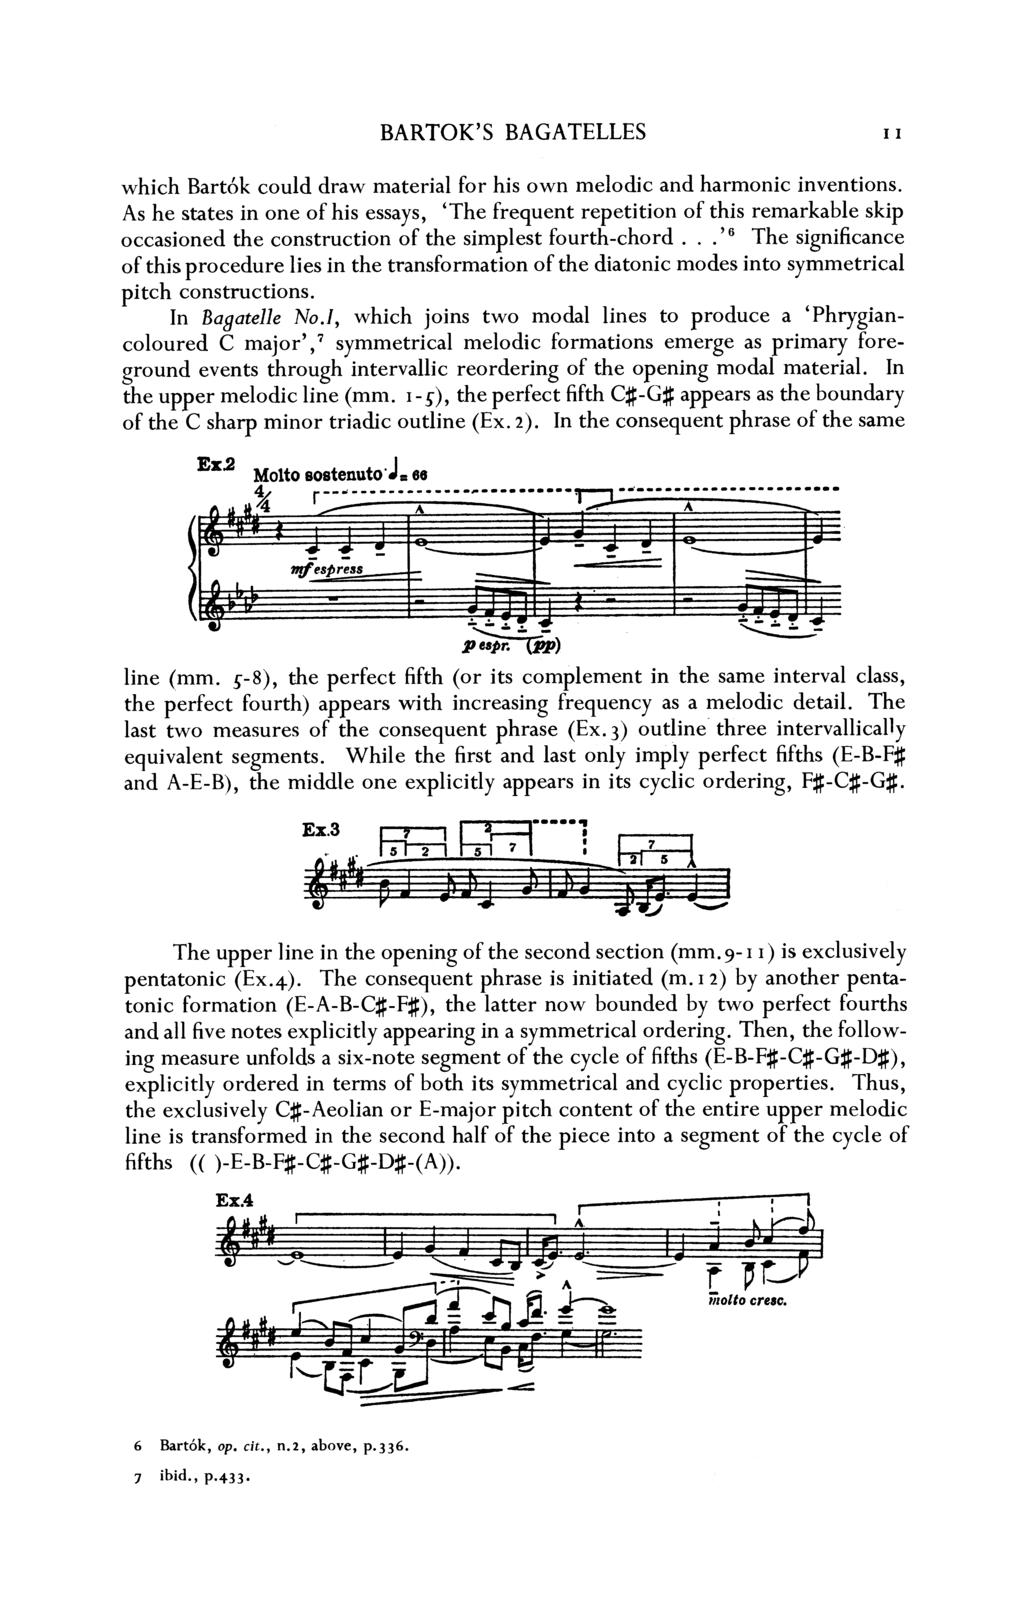 BARTOK'S BAGATELLES I I which Bartok could draw material for his own melodic and harmonic inventions.